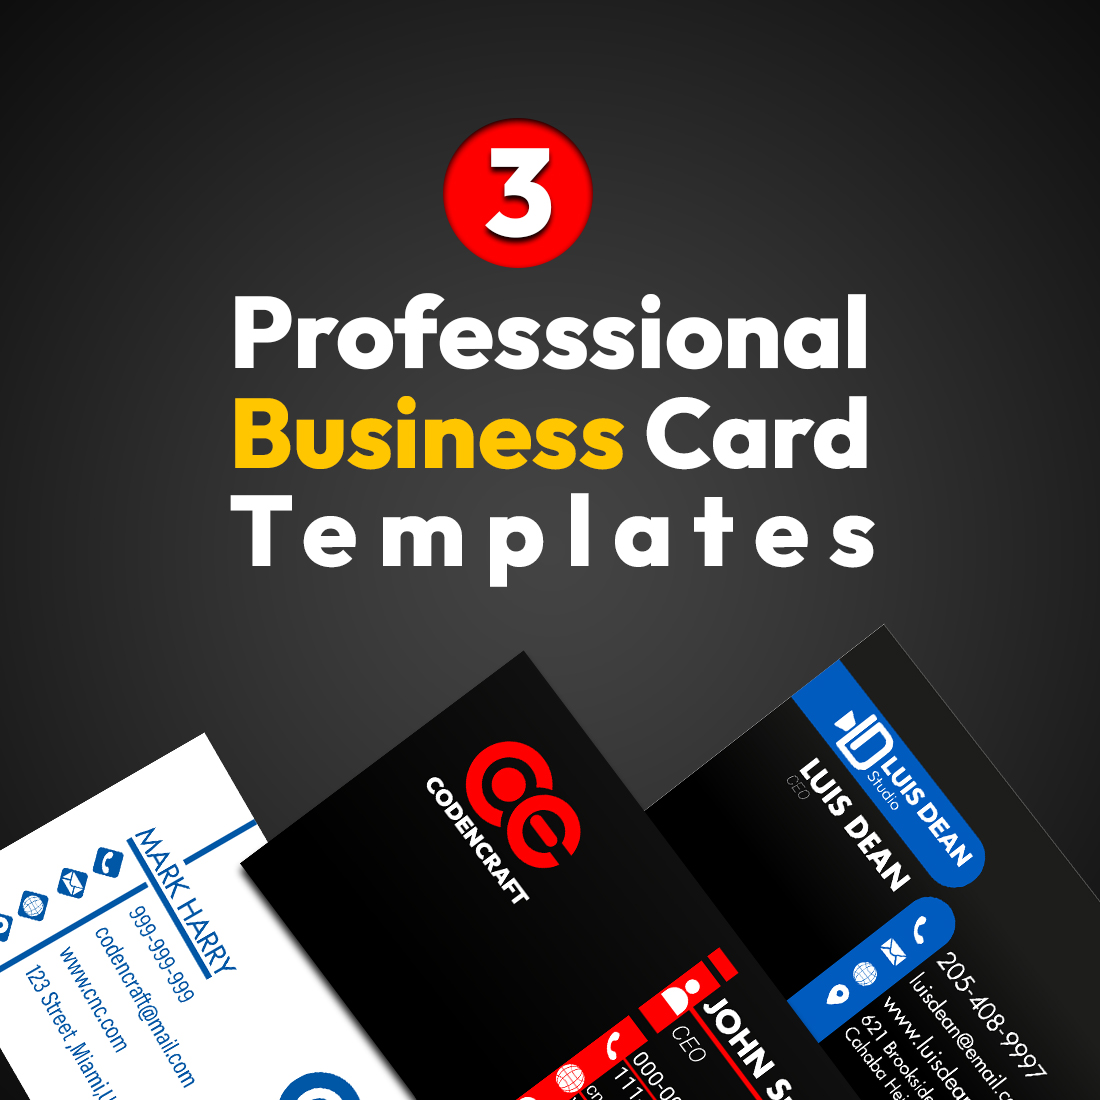 Professional Business Card Templates cover image.